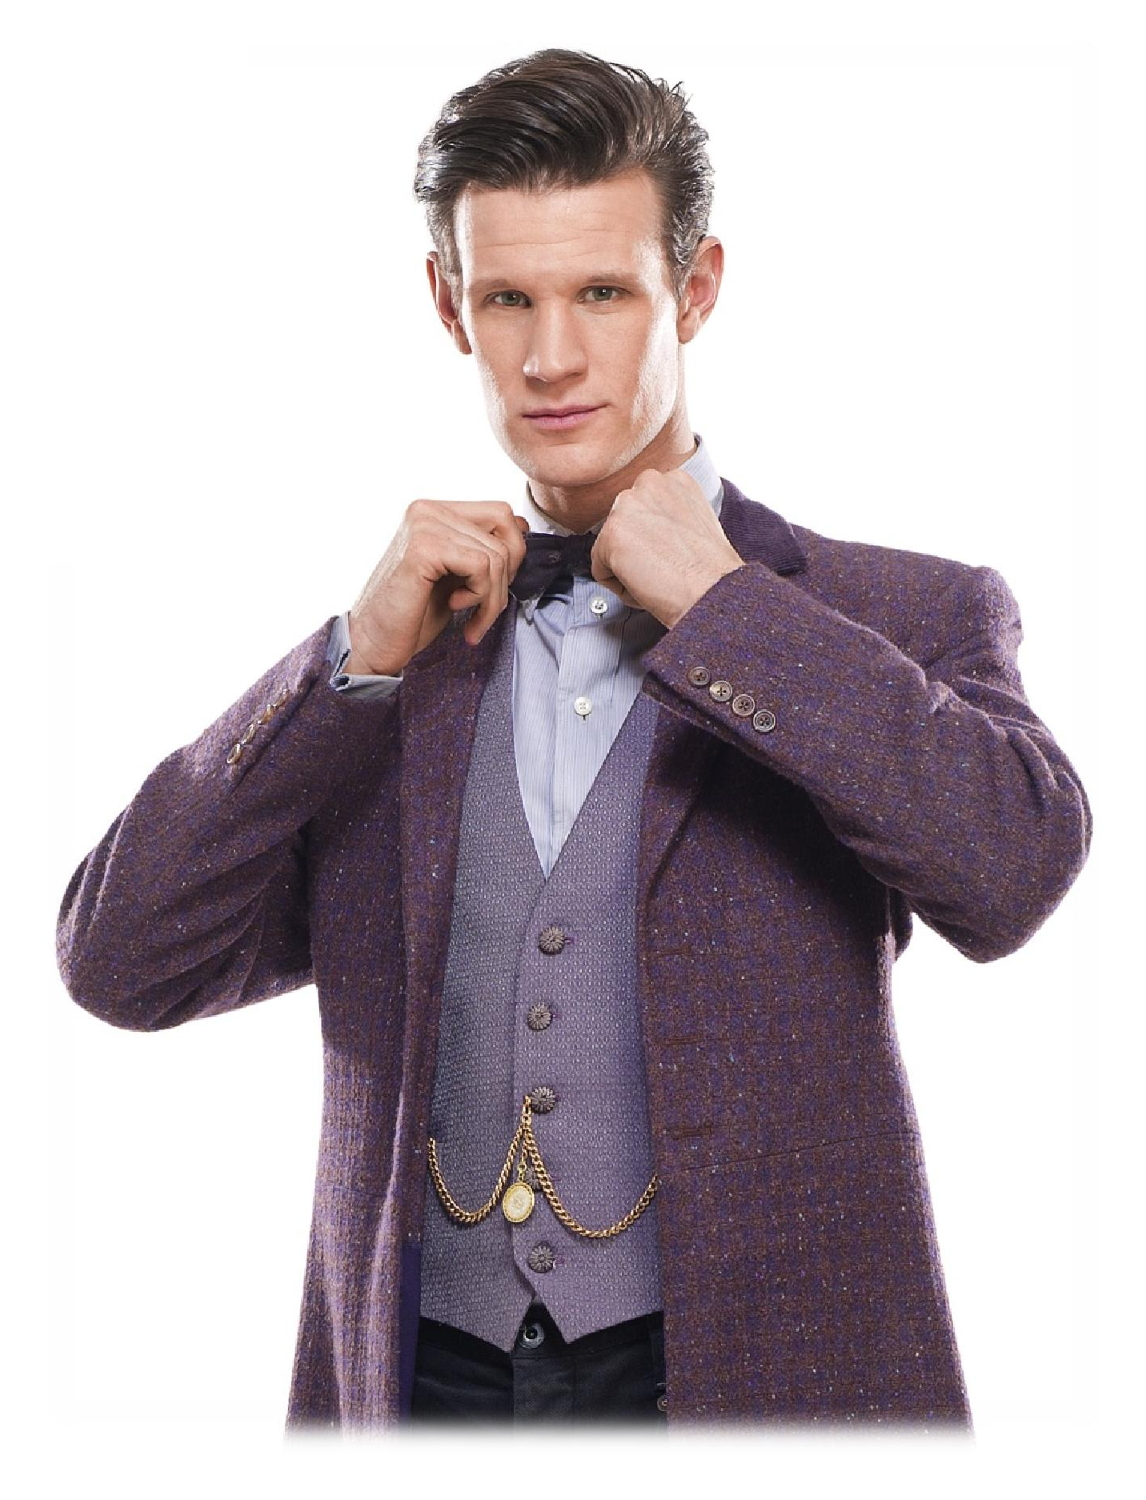 11th Doctor "scales" waistcoat - Doctor Who Costume Guide